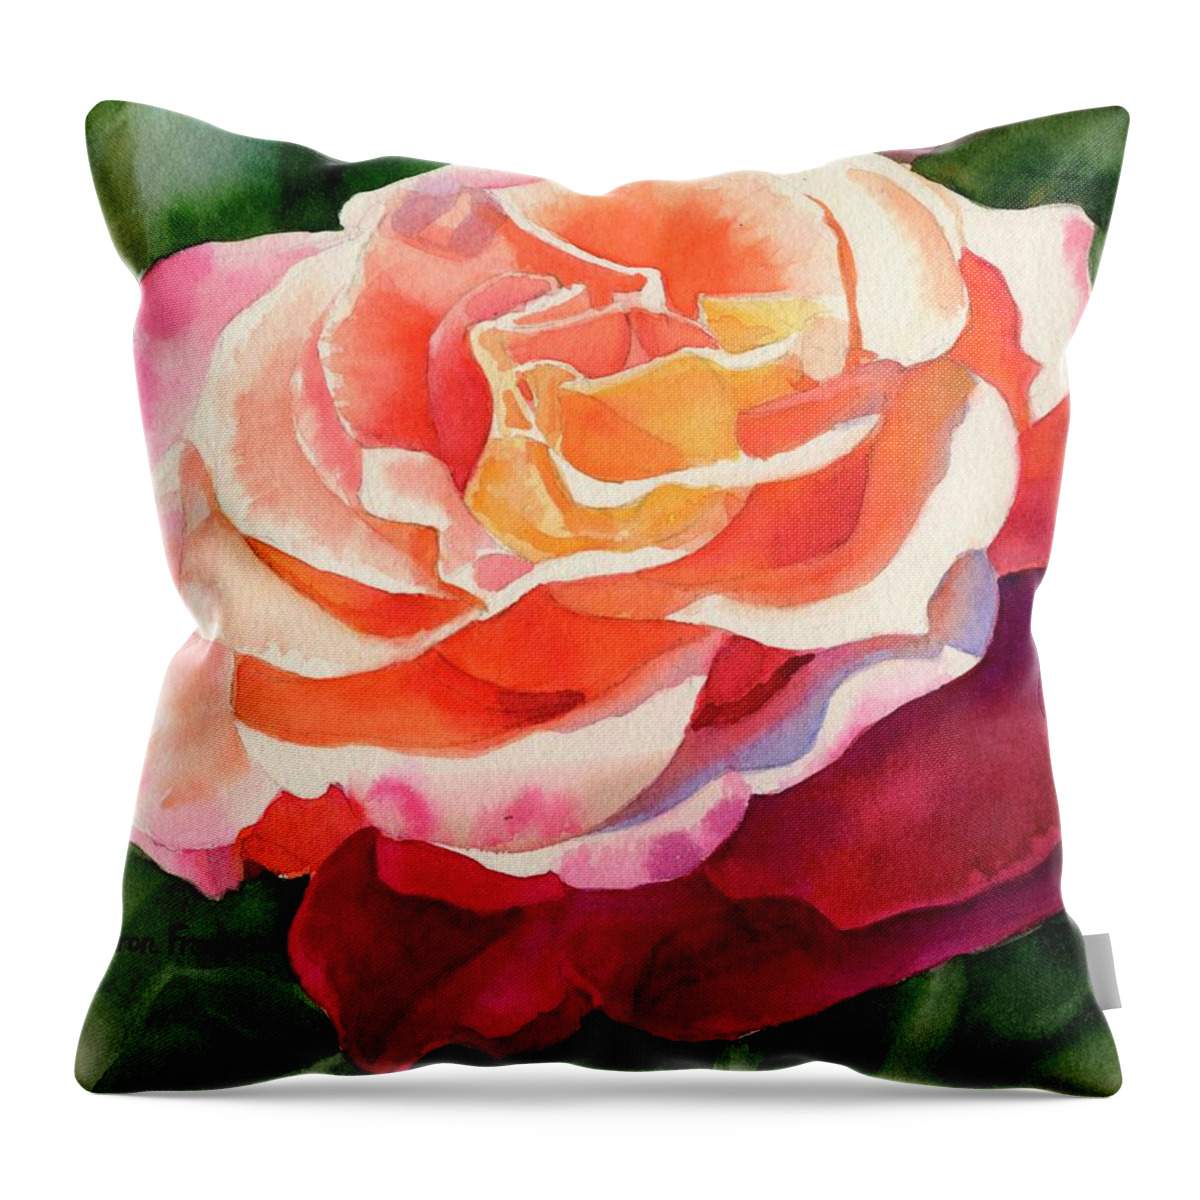 Roses Throw Pillow featuring the painting Rose Fringed with Red Petals by Sharon Freeman